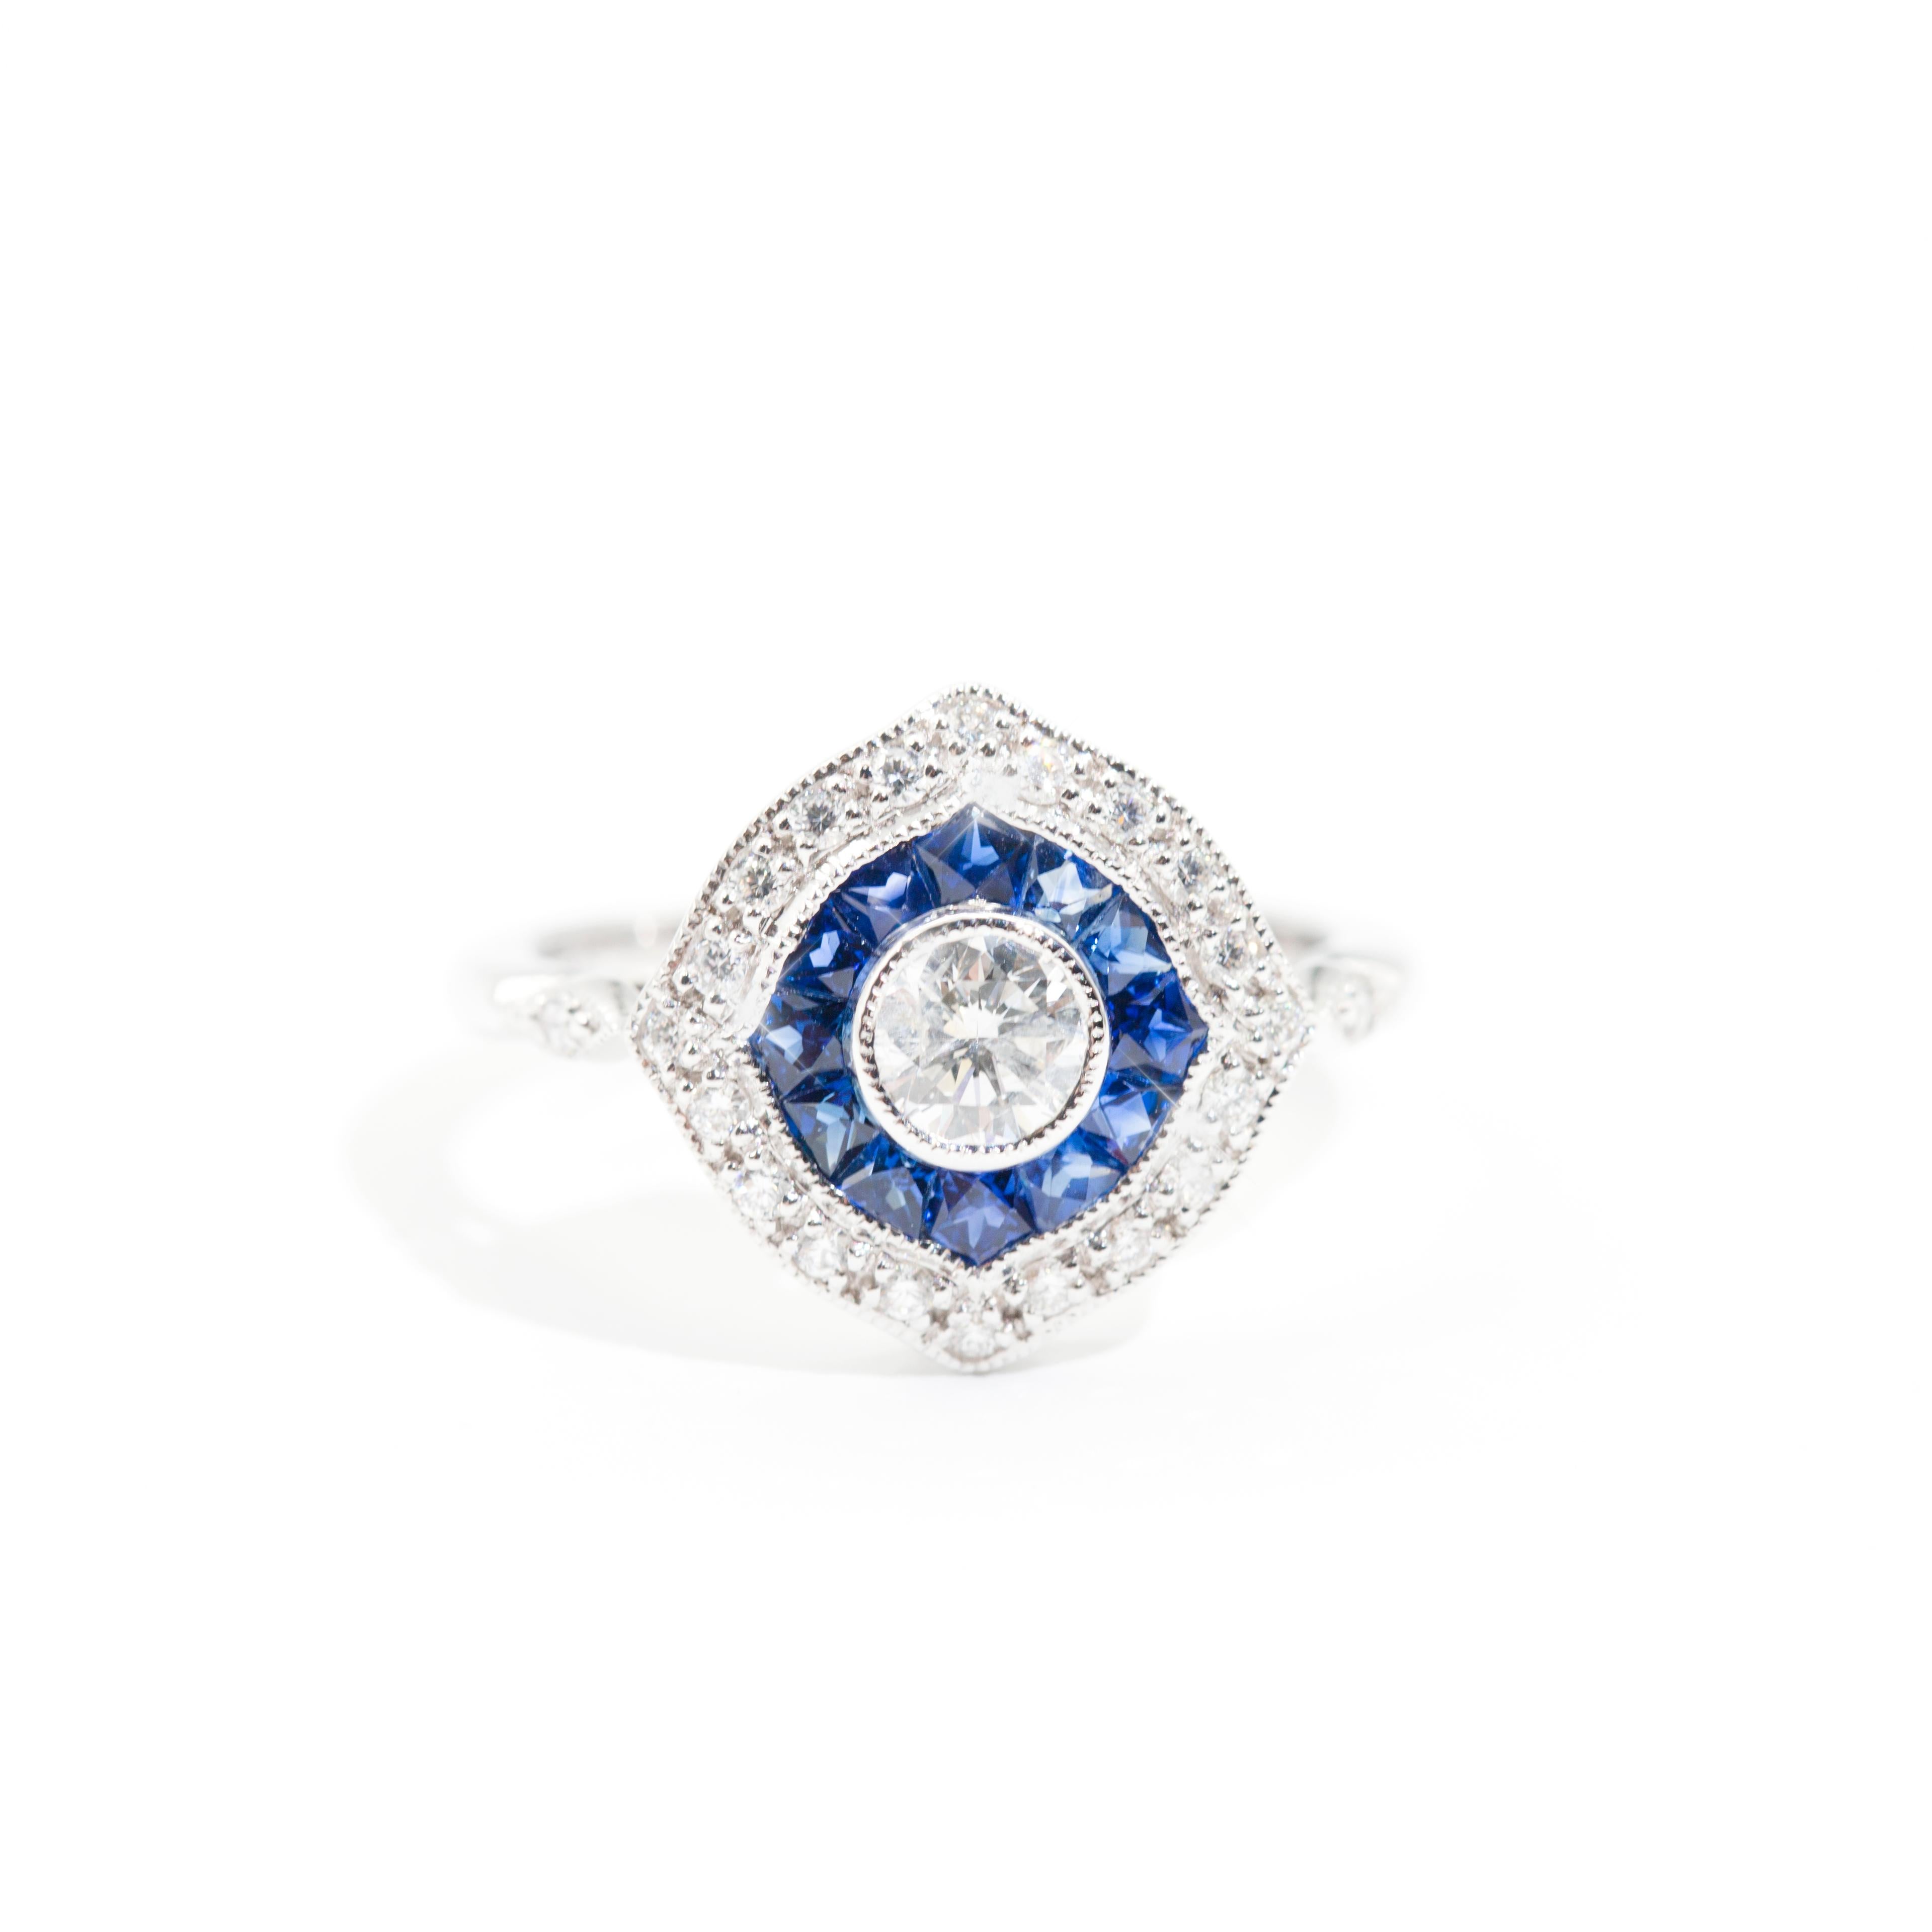 0.37 Carat Diamond and Blue Sapphire 18 Carat White Gold Cluster Ring 2